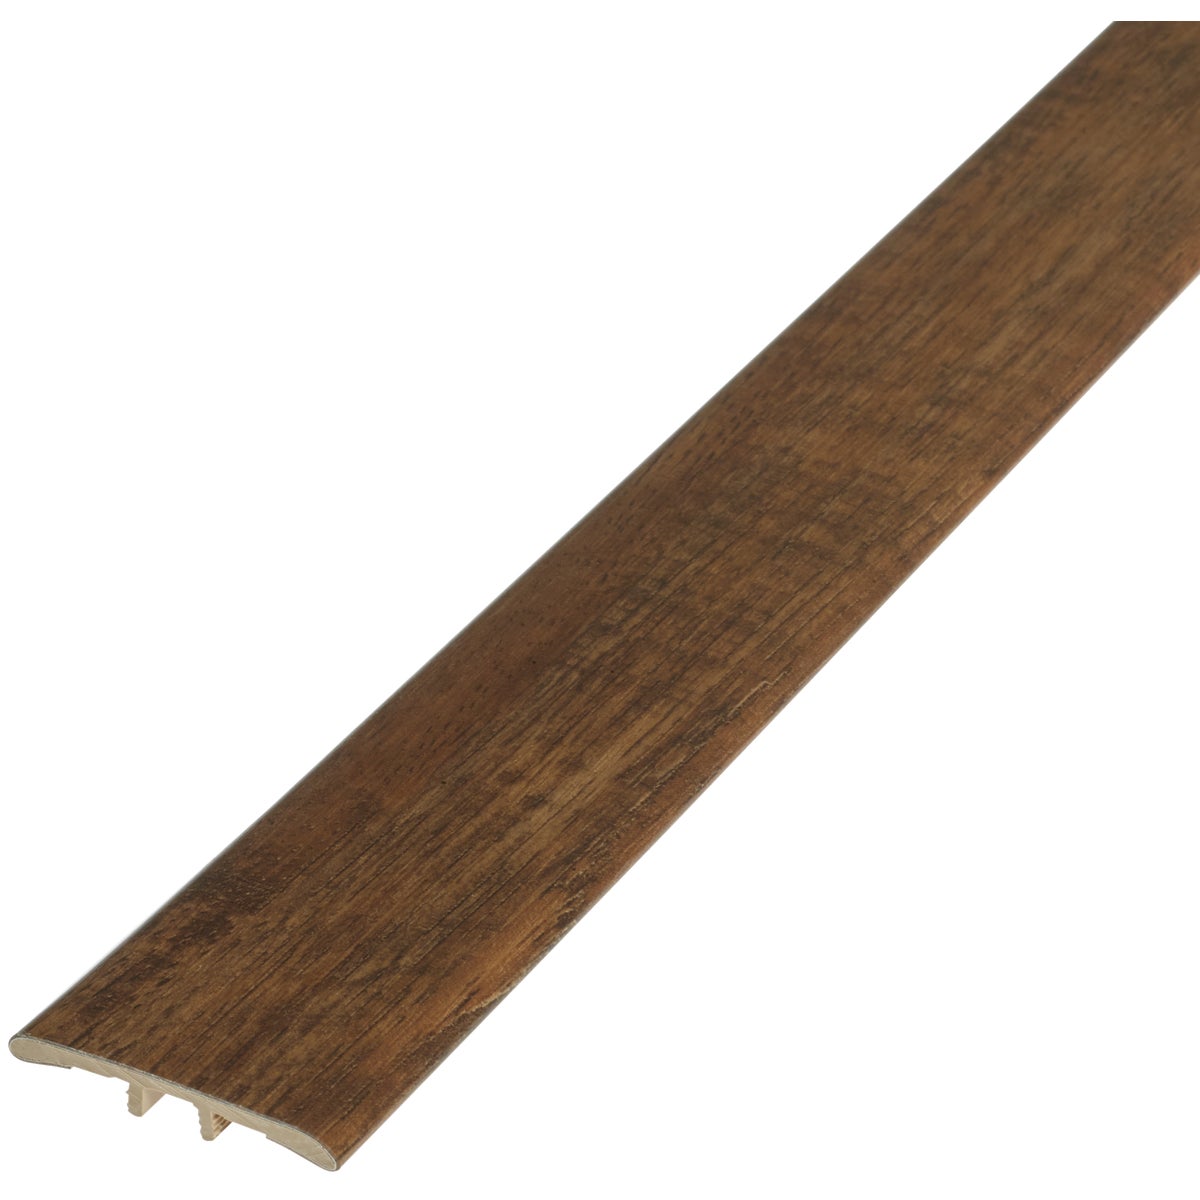 Shaw Paragon Plus 5 Brush Oak 1-3/4 In. x 94 In. T Mold Floor Transition